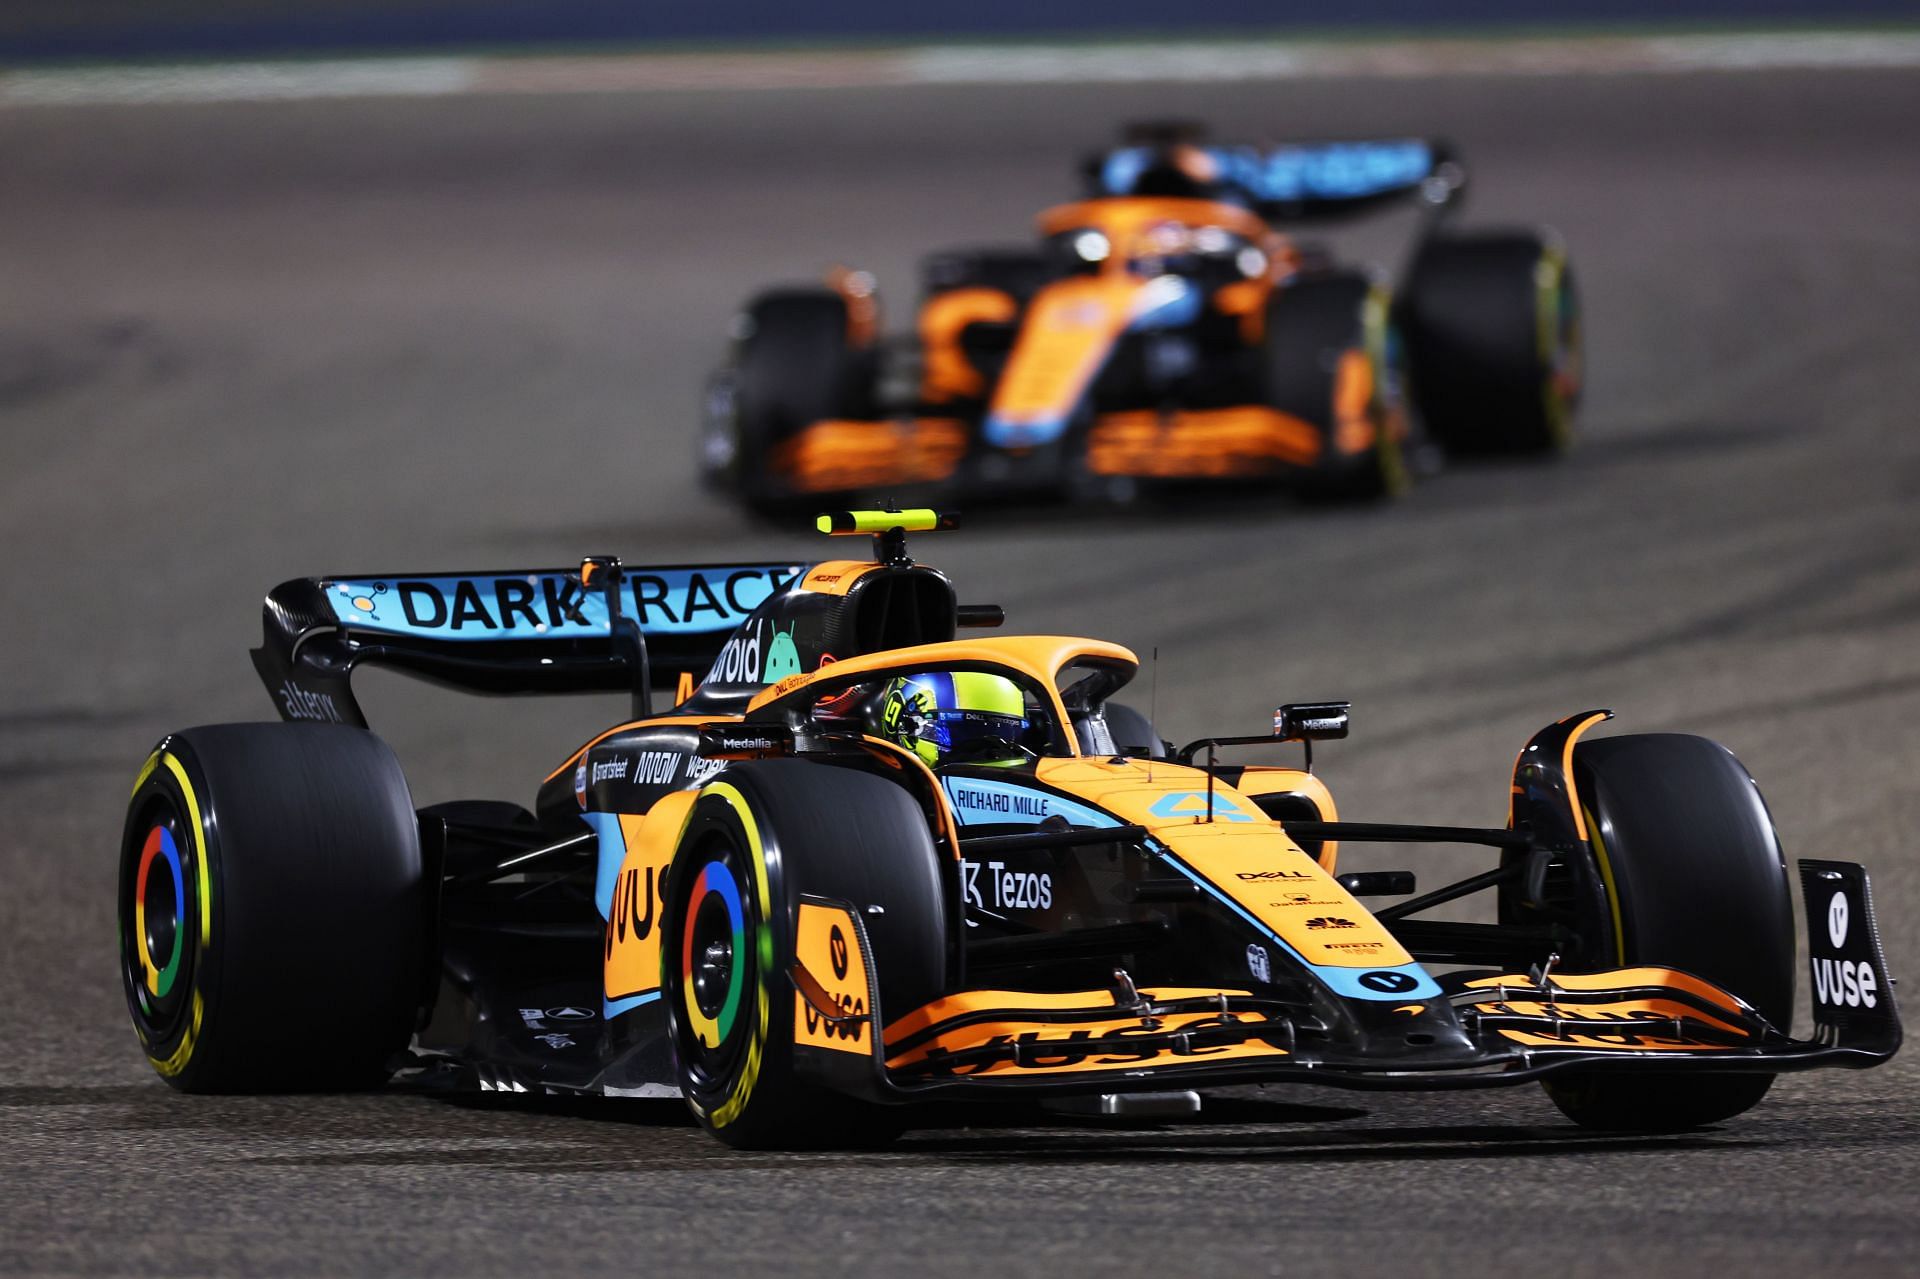 McLaren struggled for pace at the 2022 Bahrain GP